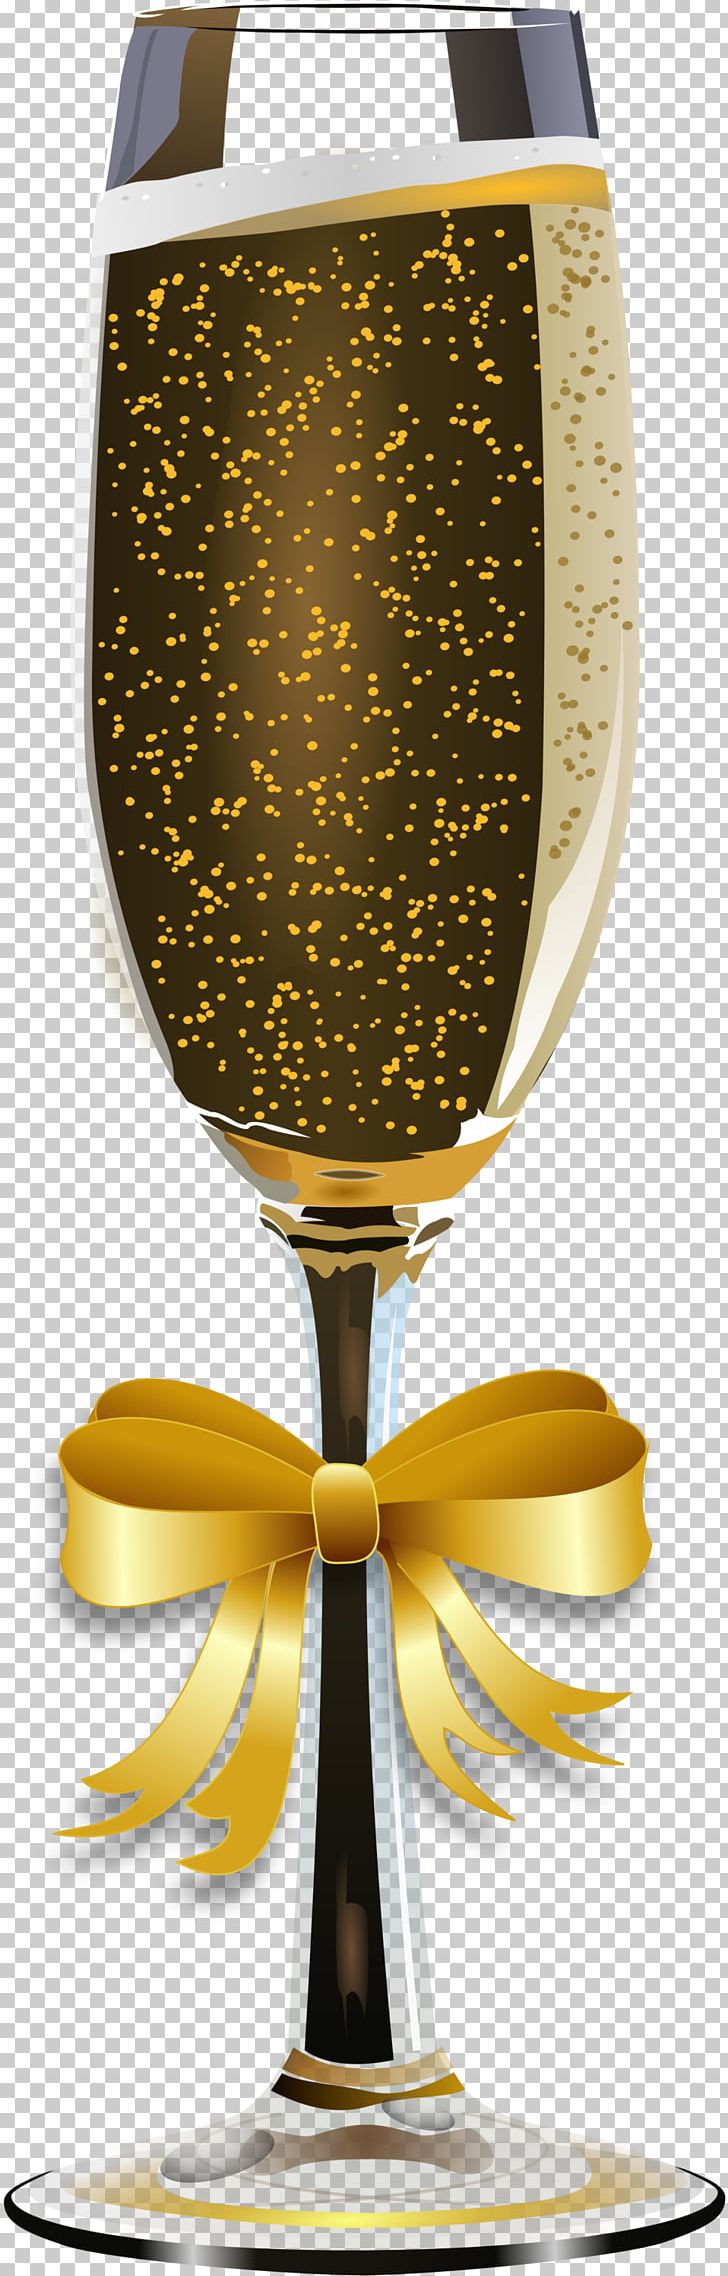 Champagne Glass Beer PNG, Clipart, Beer, Beer Bottle, Bottle, Champagne, Champagne Glass Free PNG Download